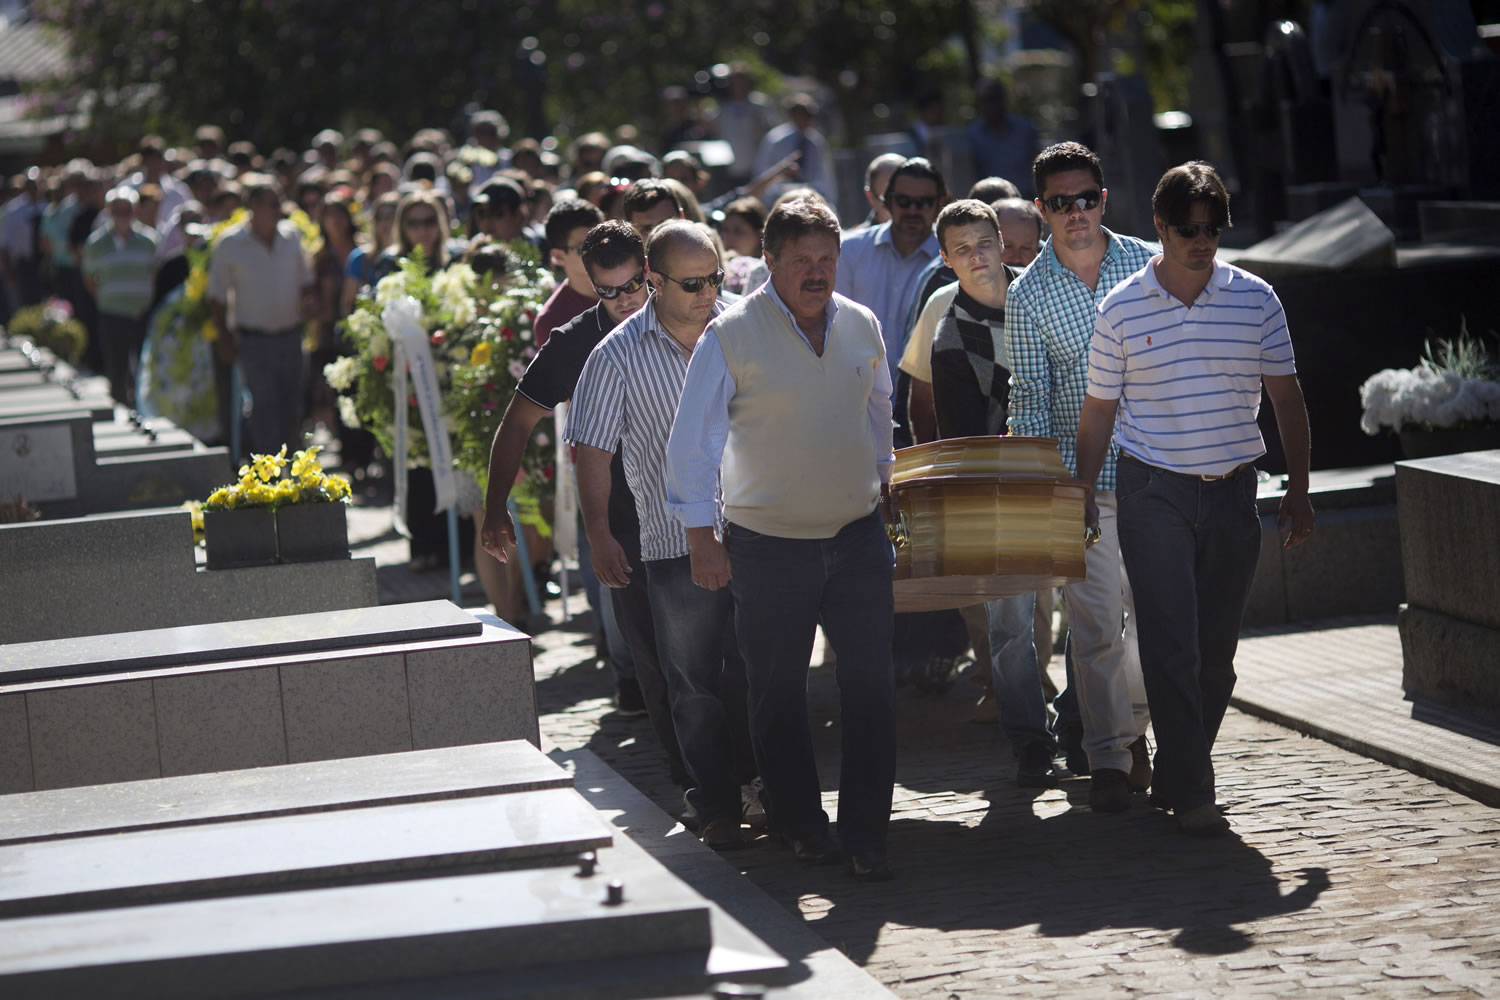 Relatives and friends carry the coffins of two brothers, Pedro and Marcelo Salla, who died in a nightclub fire, as they prepare to bury them at a cemetery in Santa Maria, Brazil, on Monday.